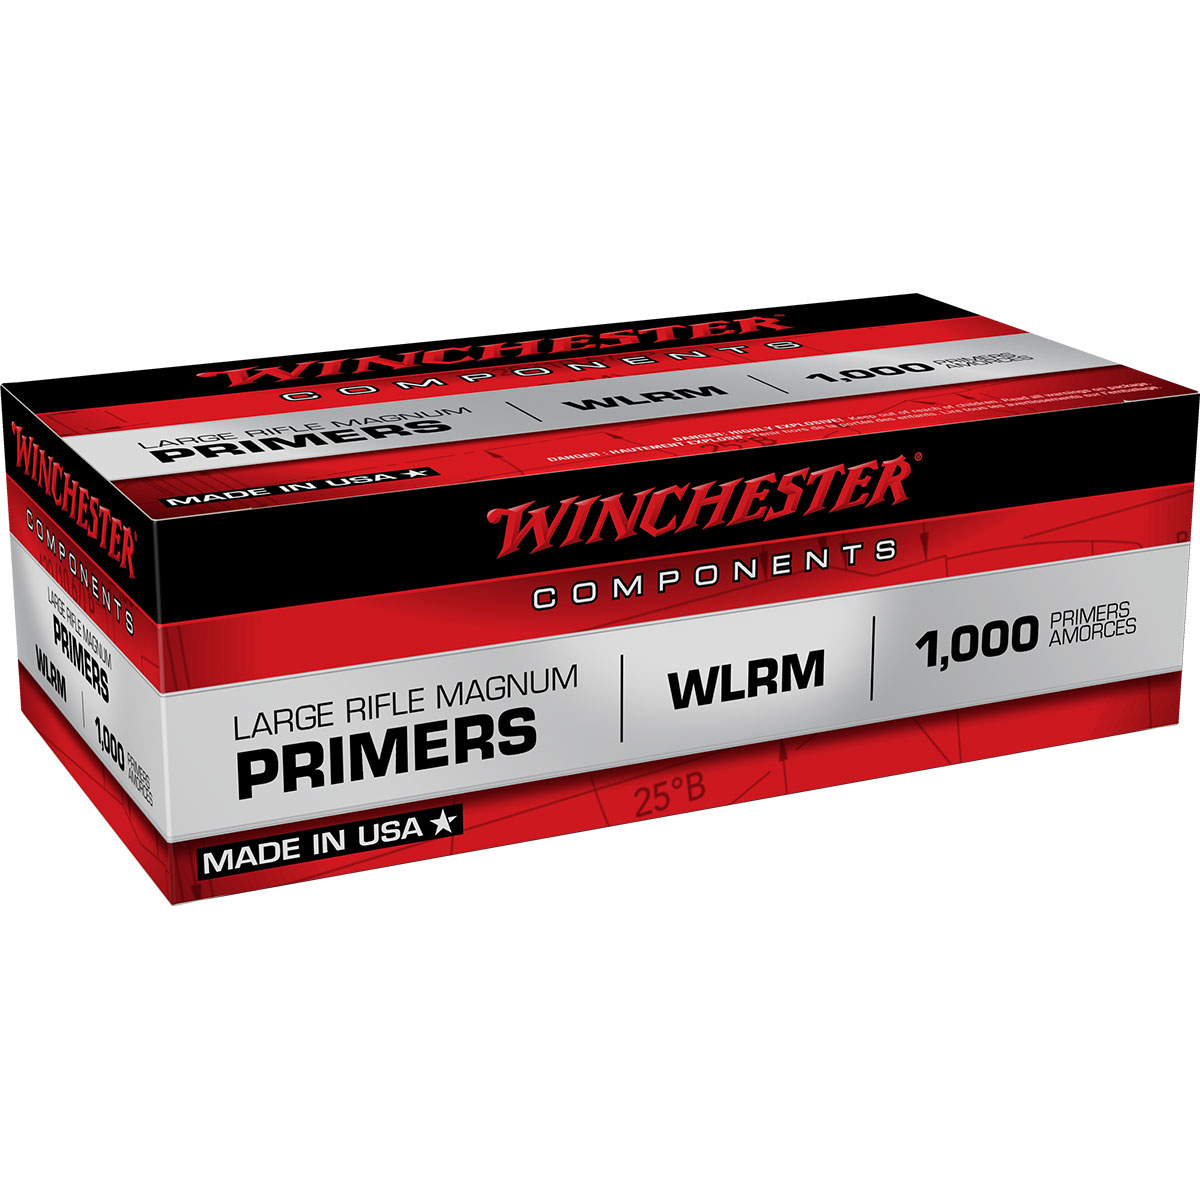 WINCHESTER - LARGE RIFLE MAGNUM PRIMERS